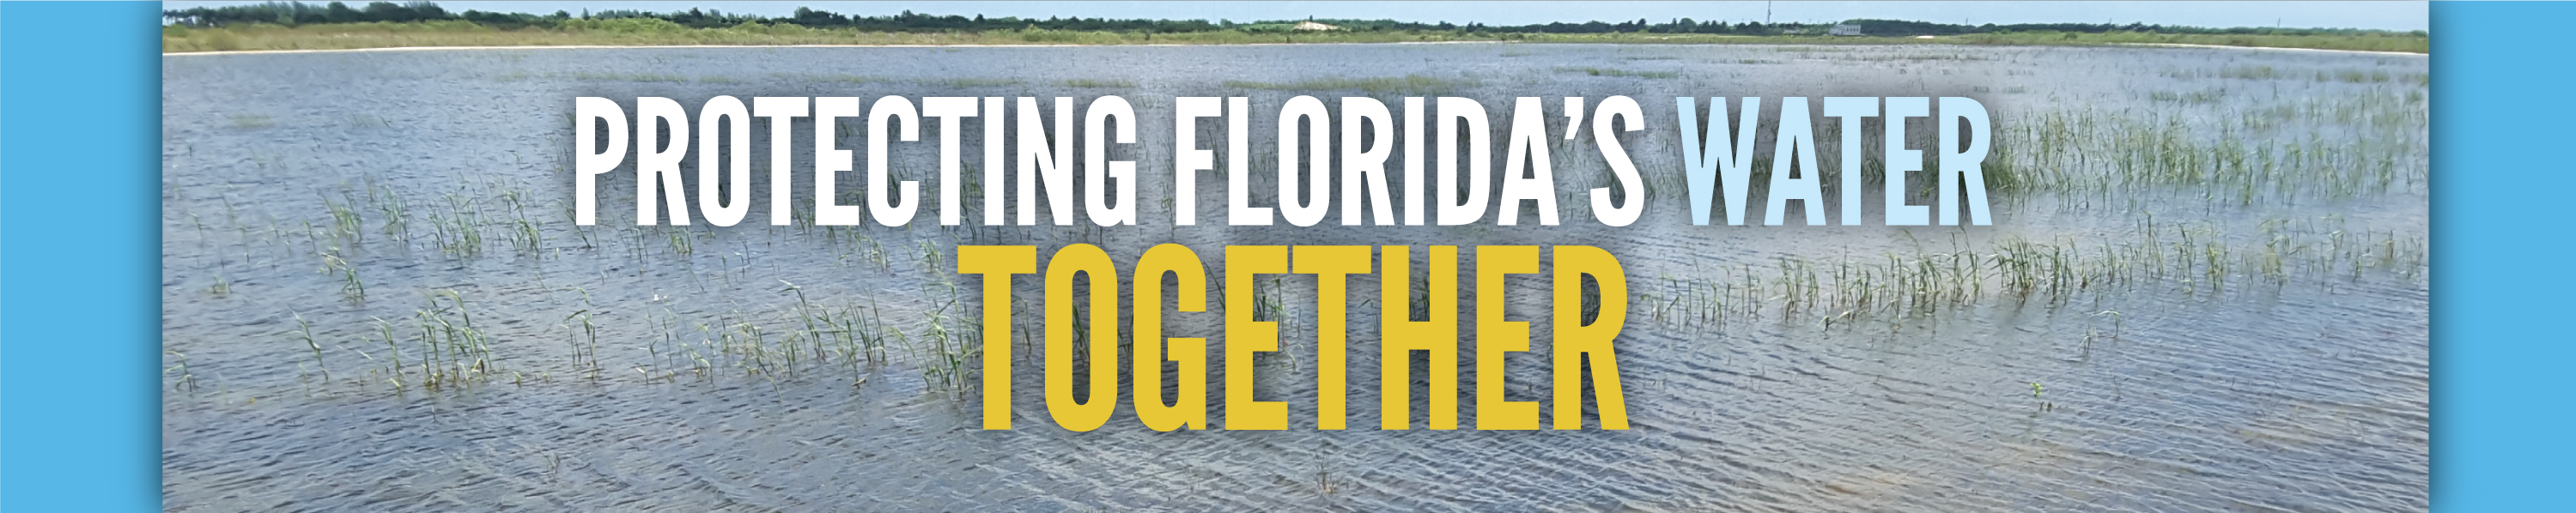 Protecting Florida's Water Together